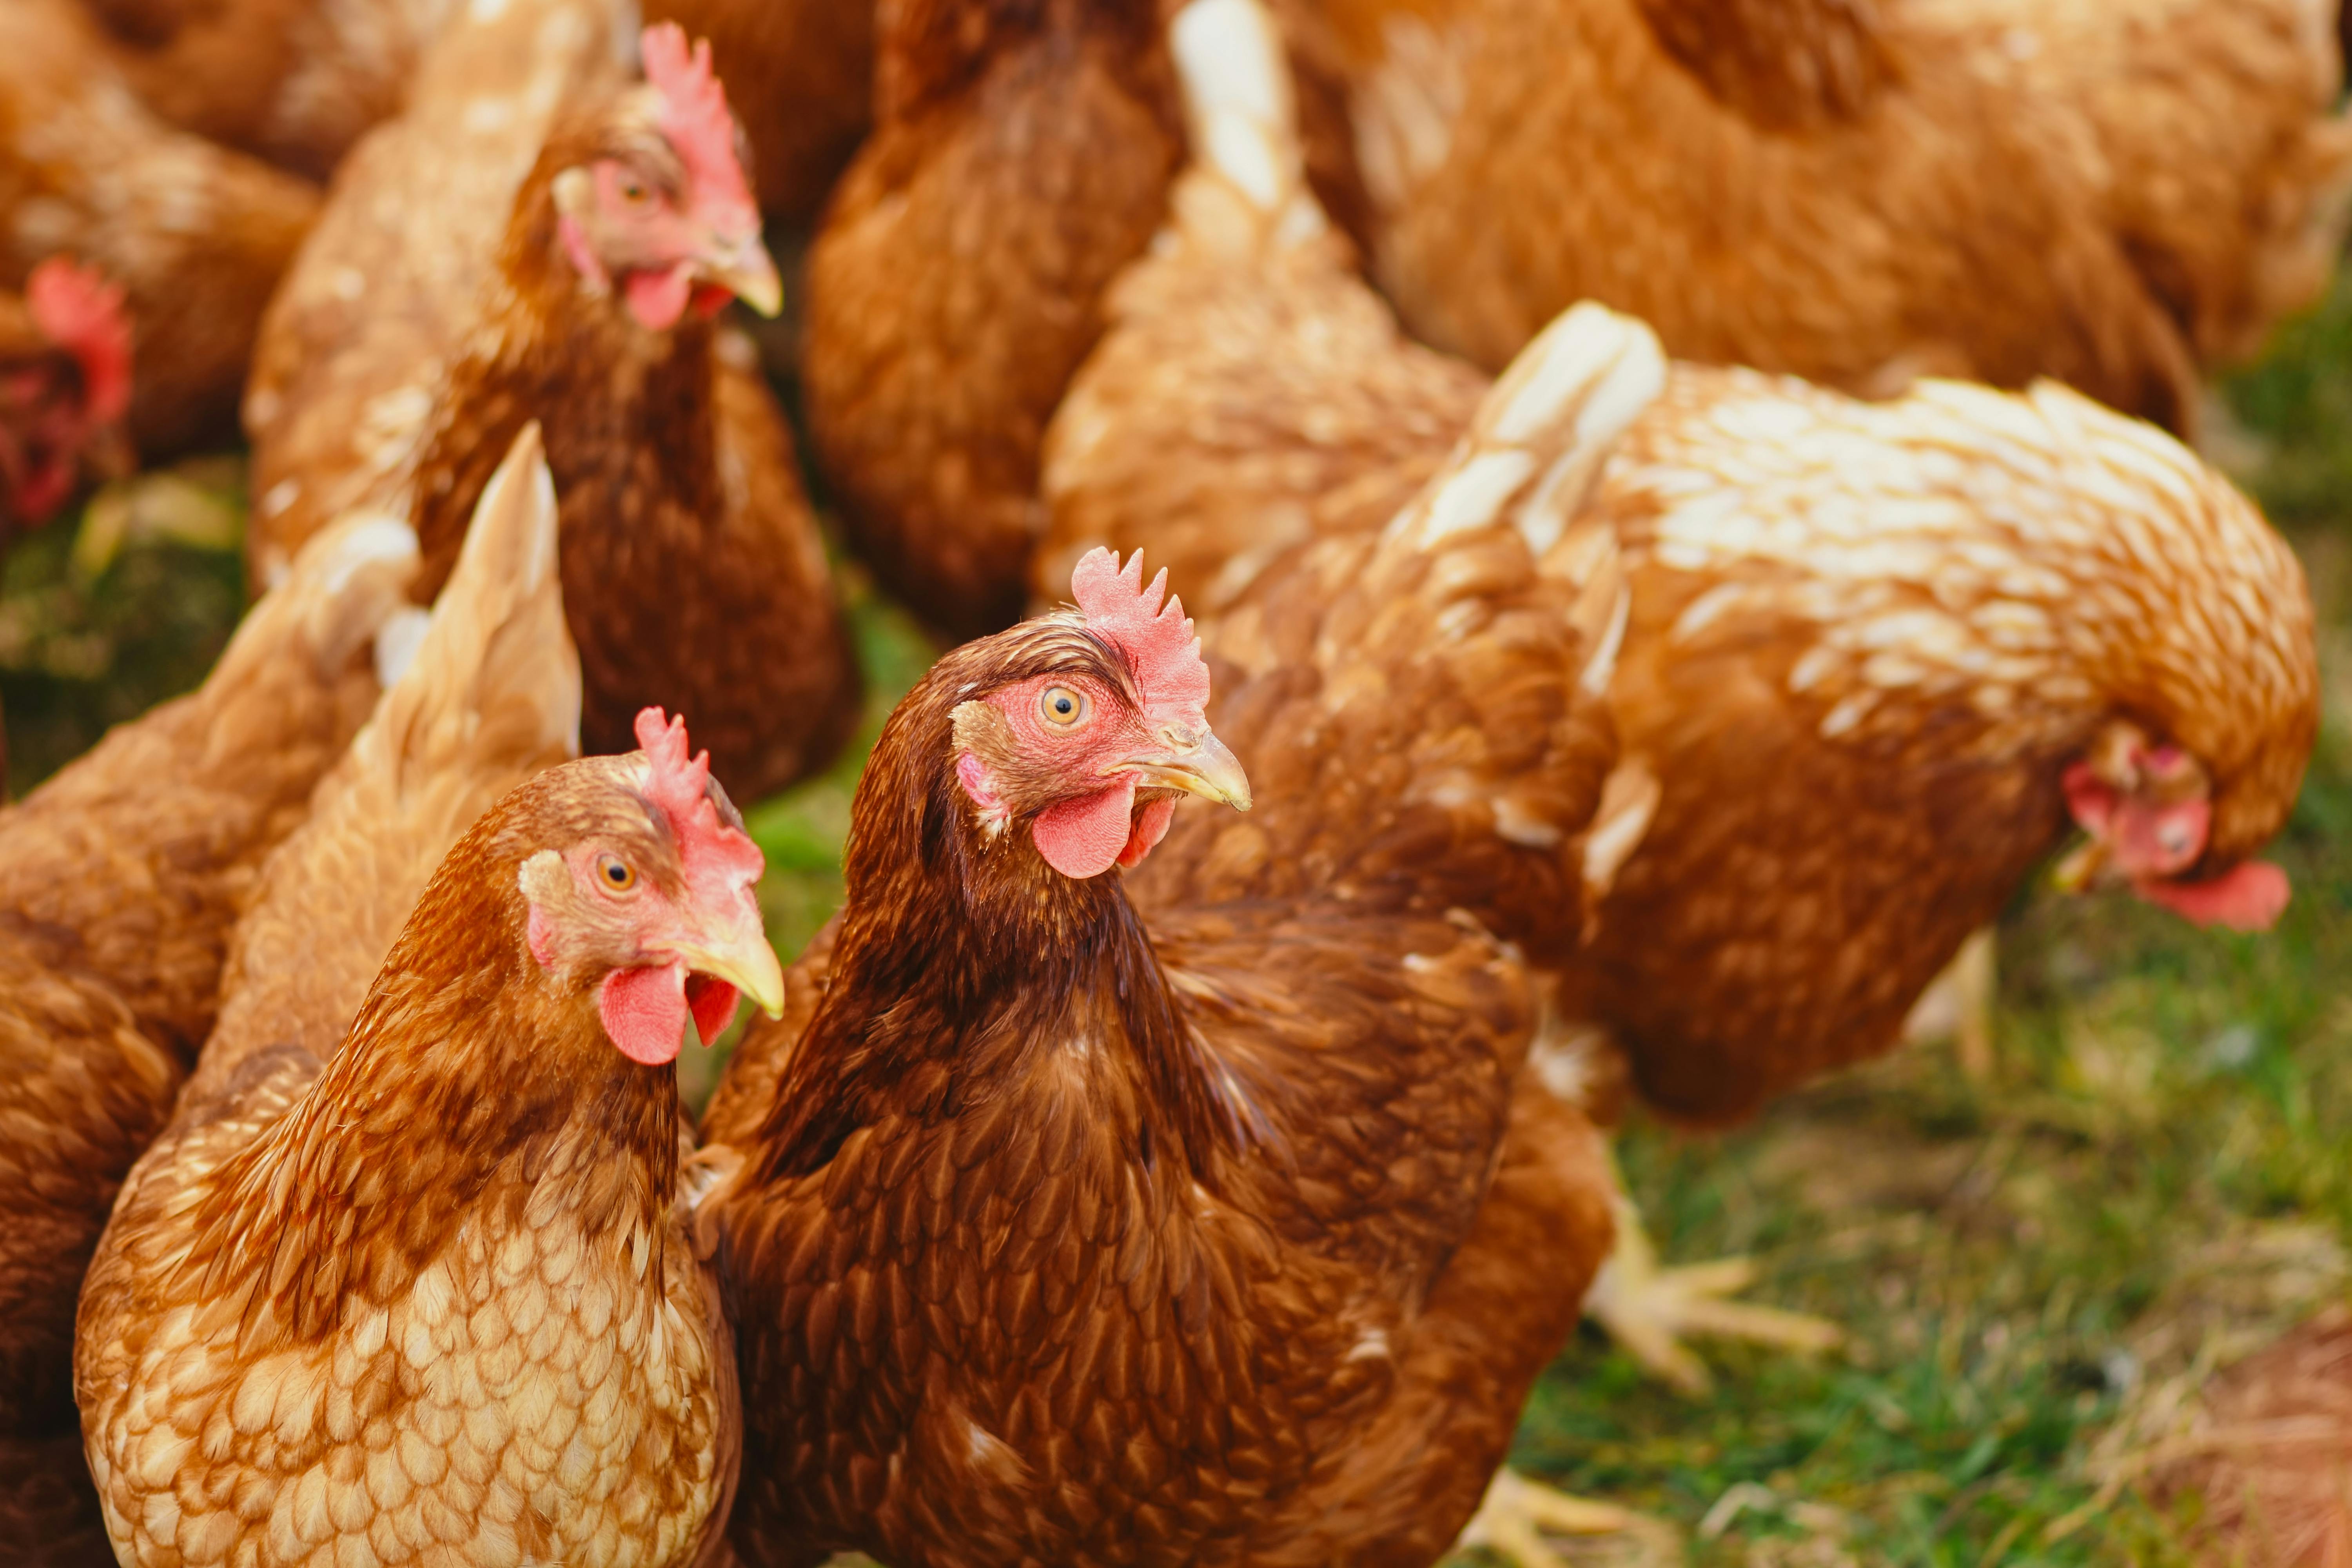 677,602 Chicken Farm Royalty-Free Photos and Stock Images